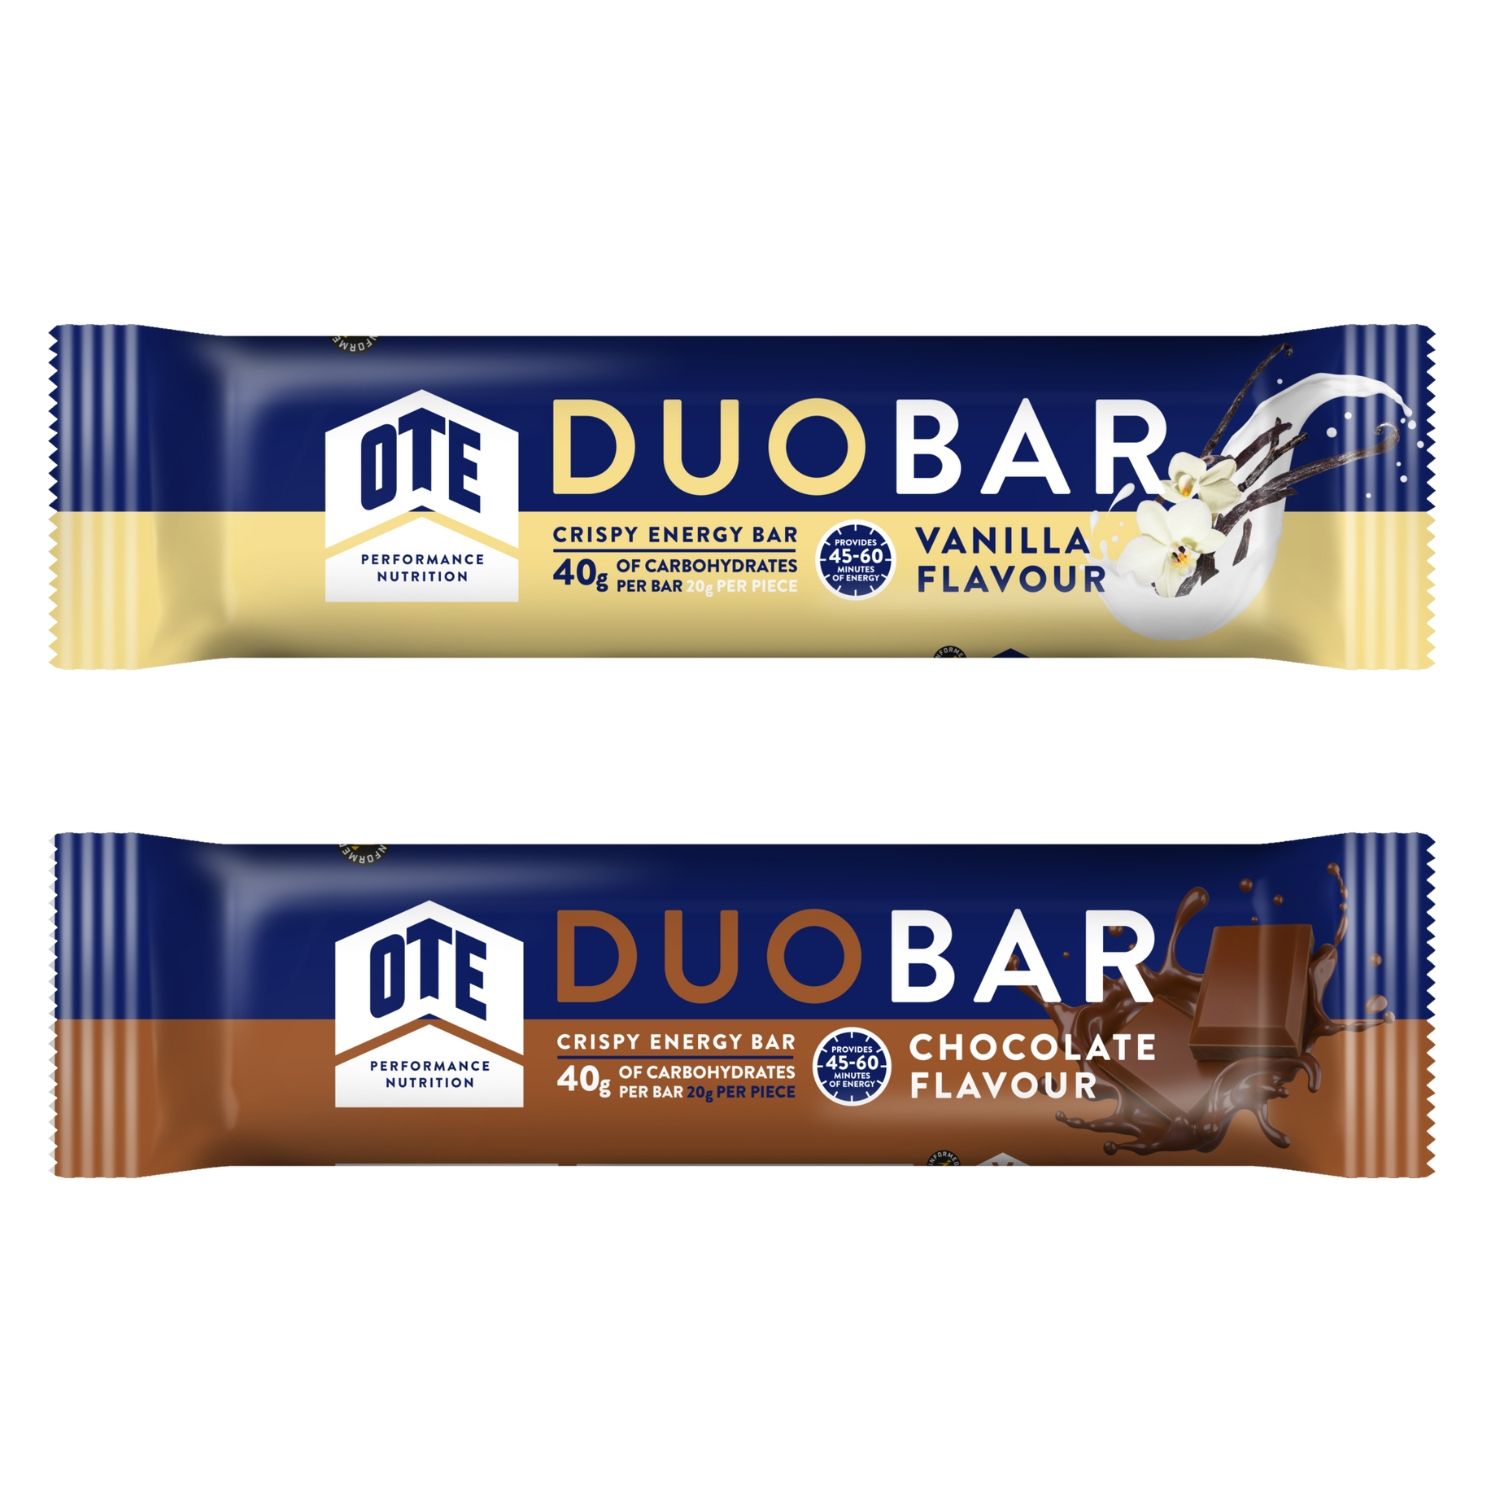  Pack 12 Thanh OTE Duo Bar Mix Vị 